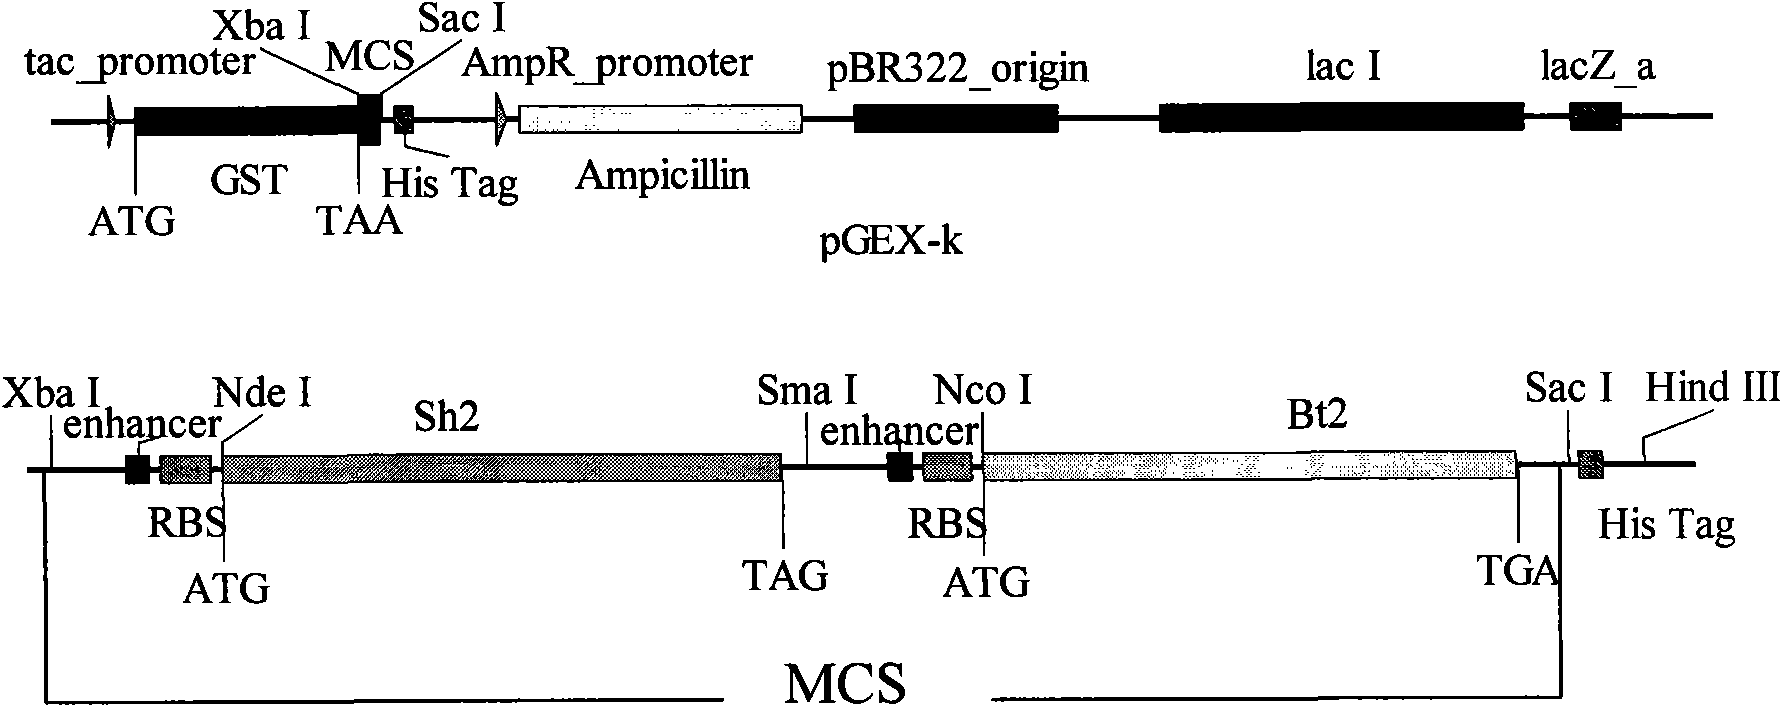 ADP-glucose pyrophosphorylase mutant, encoding genes thereof and application of same two